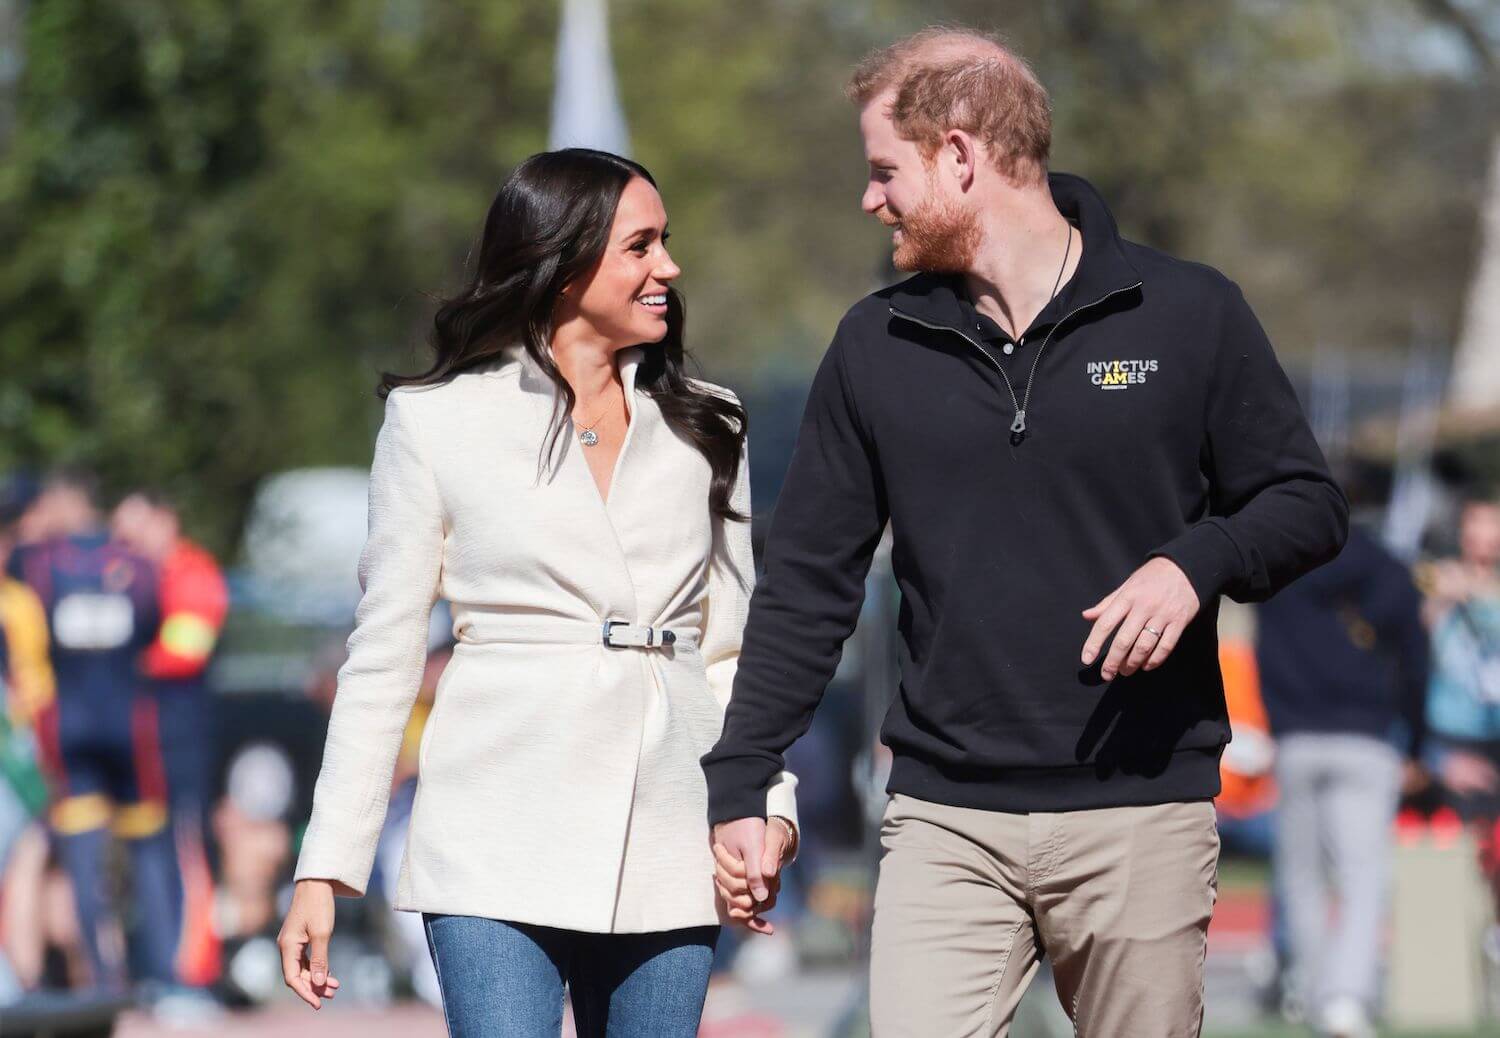 Body Language Expert Points Out Prince Harry and Meghan Markle’s ‘Performance’ During Recent Date Night